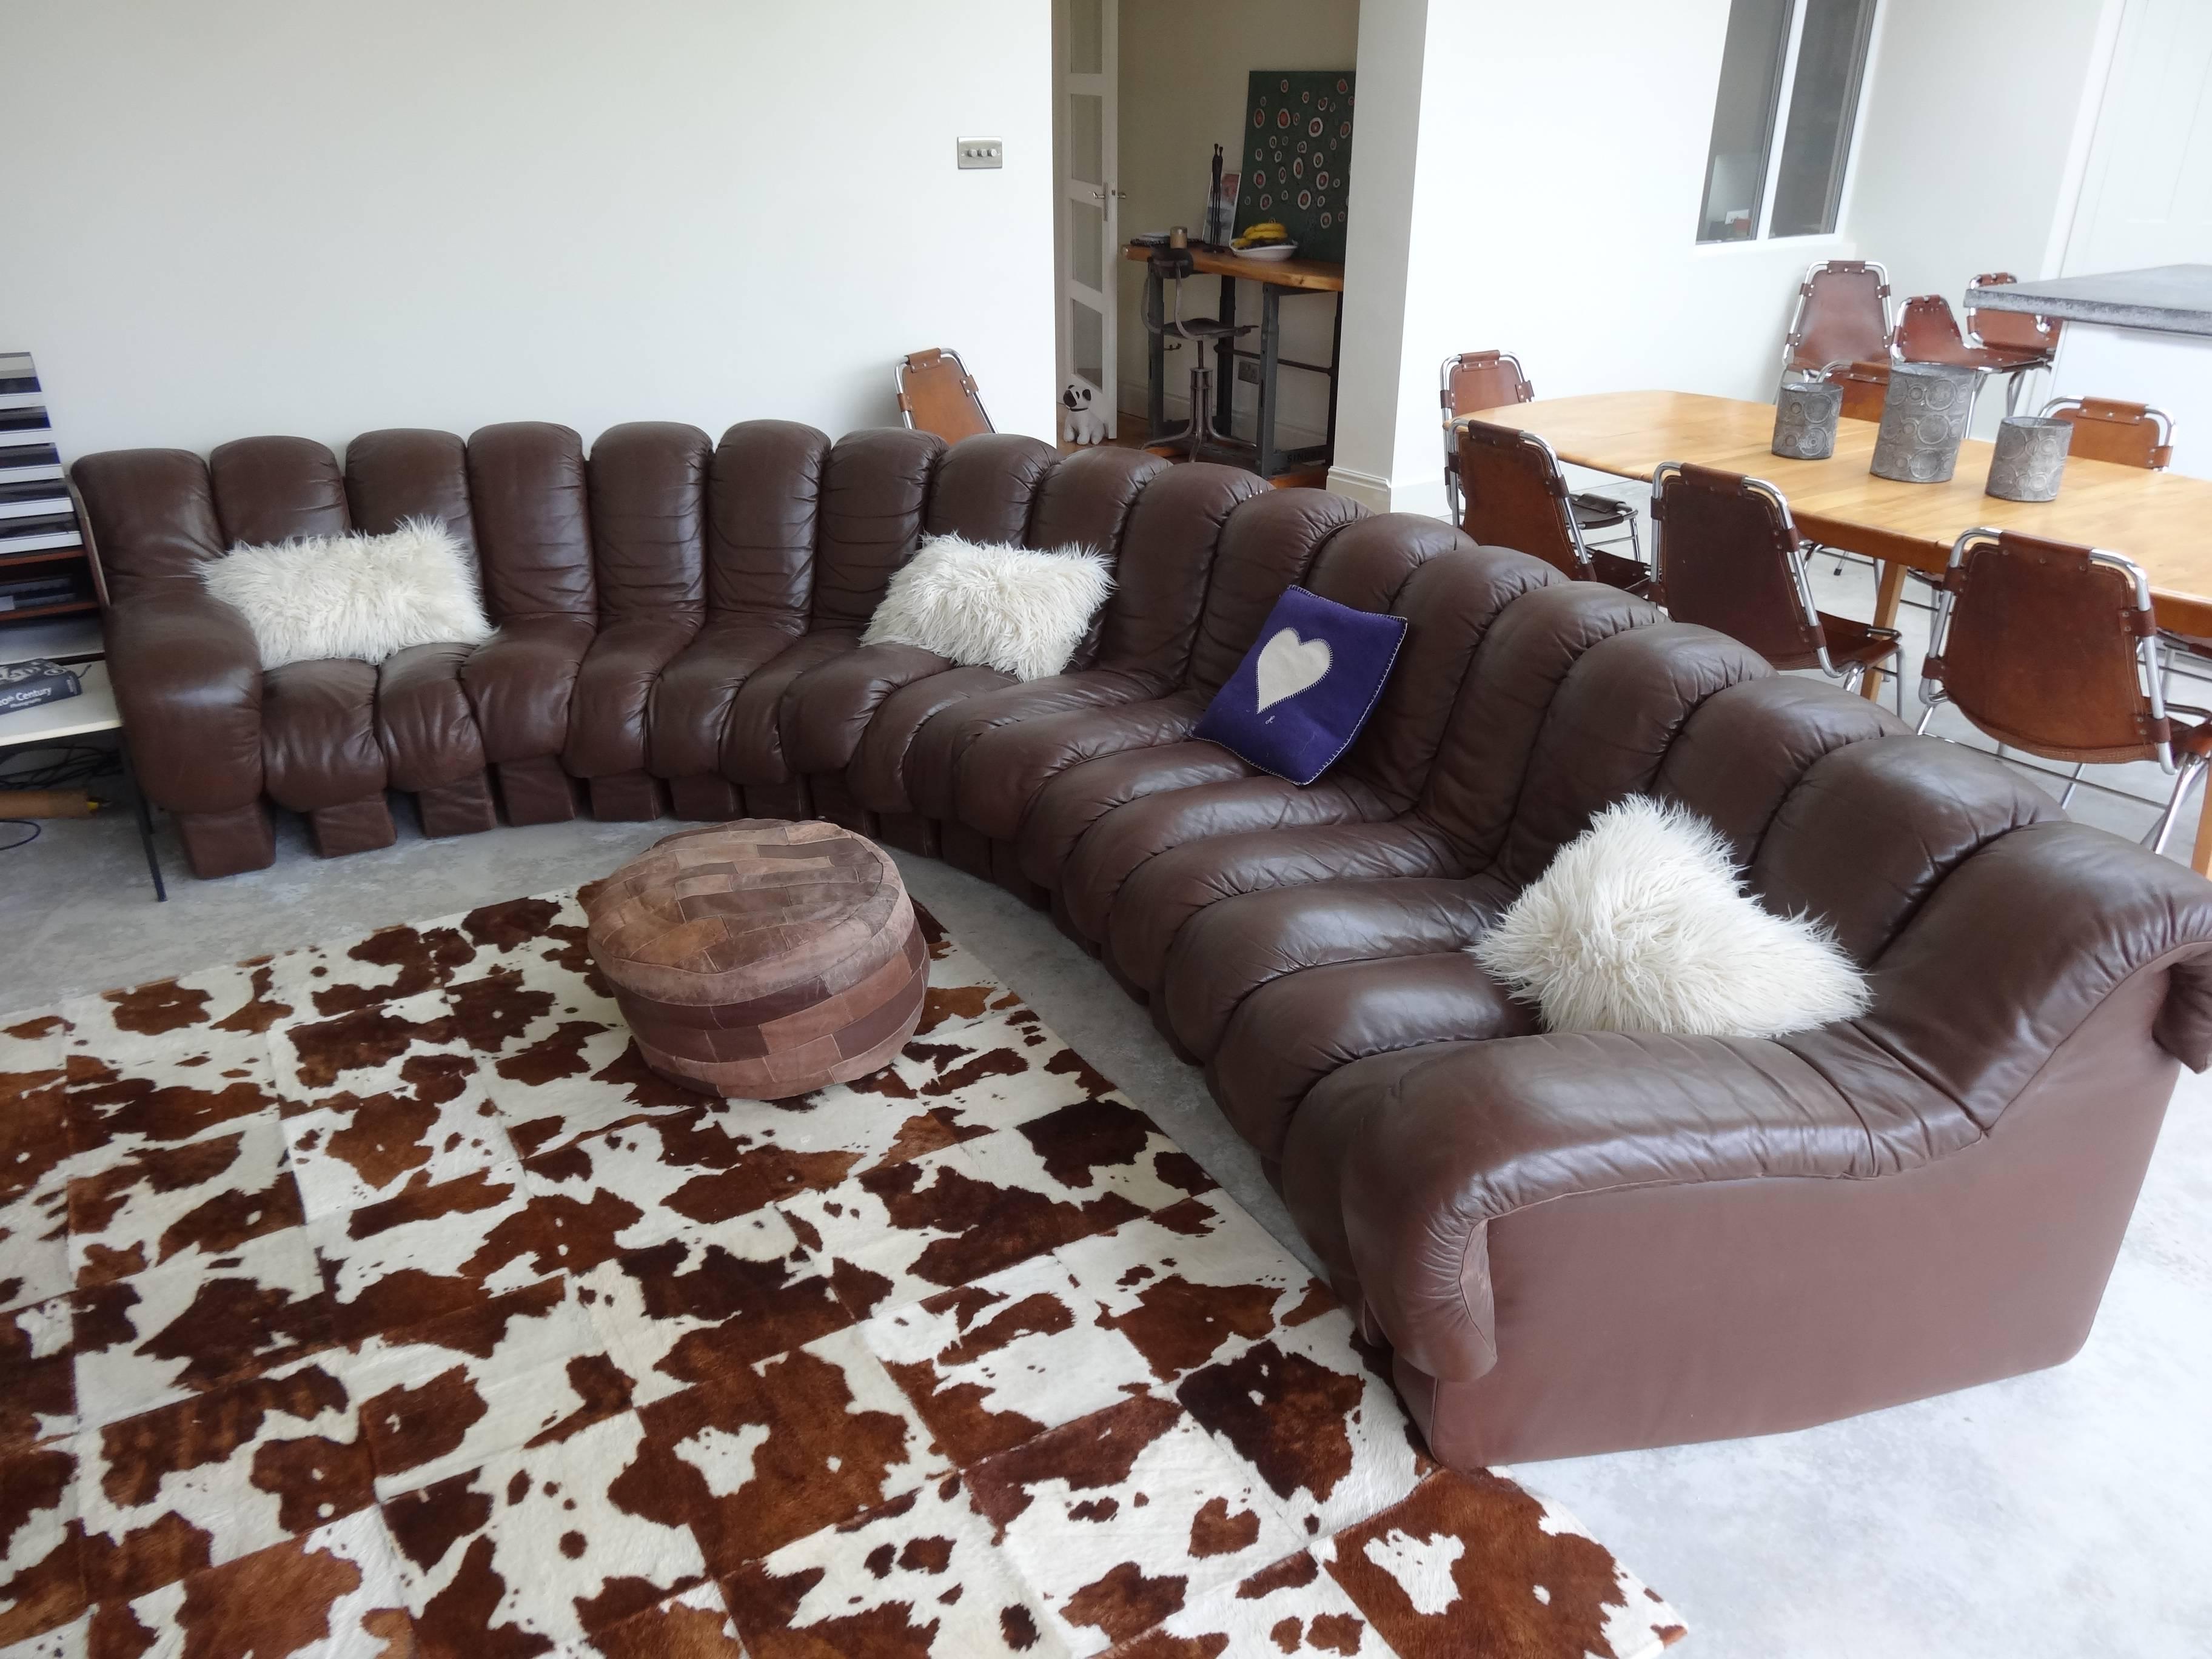 A very large vintage De Sede DS - 600 non stop sofa with 18 sections in brown leather, all in very good vintage original condition!

Product: DS 600
Manufacturer: De Sede 
Designer: Ueli bergere, Elenora Peduzzi-Riva, Heinz Ulrich, Klaus Vogt
Year: